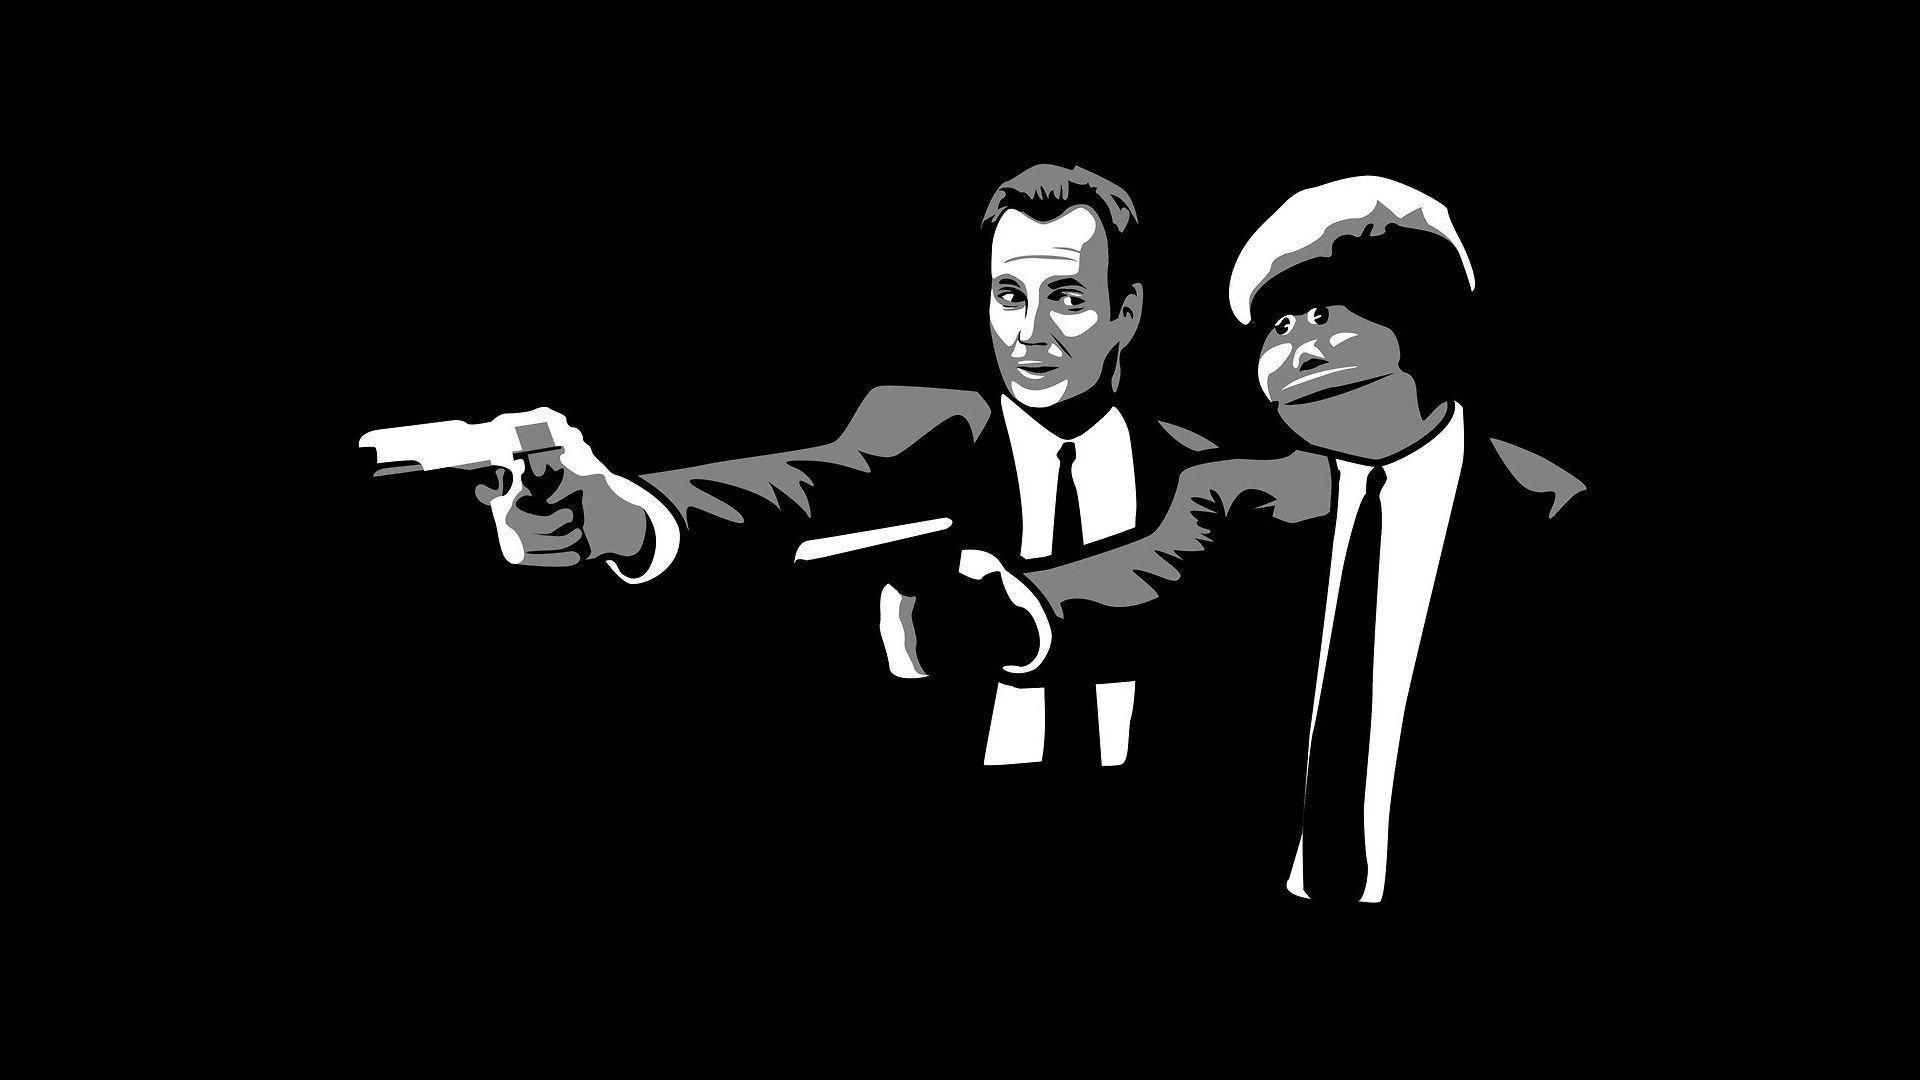 Pulp Fiction crossover I found in Tumblur